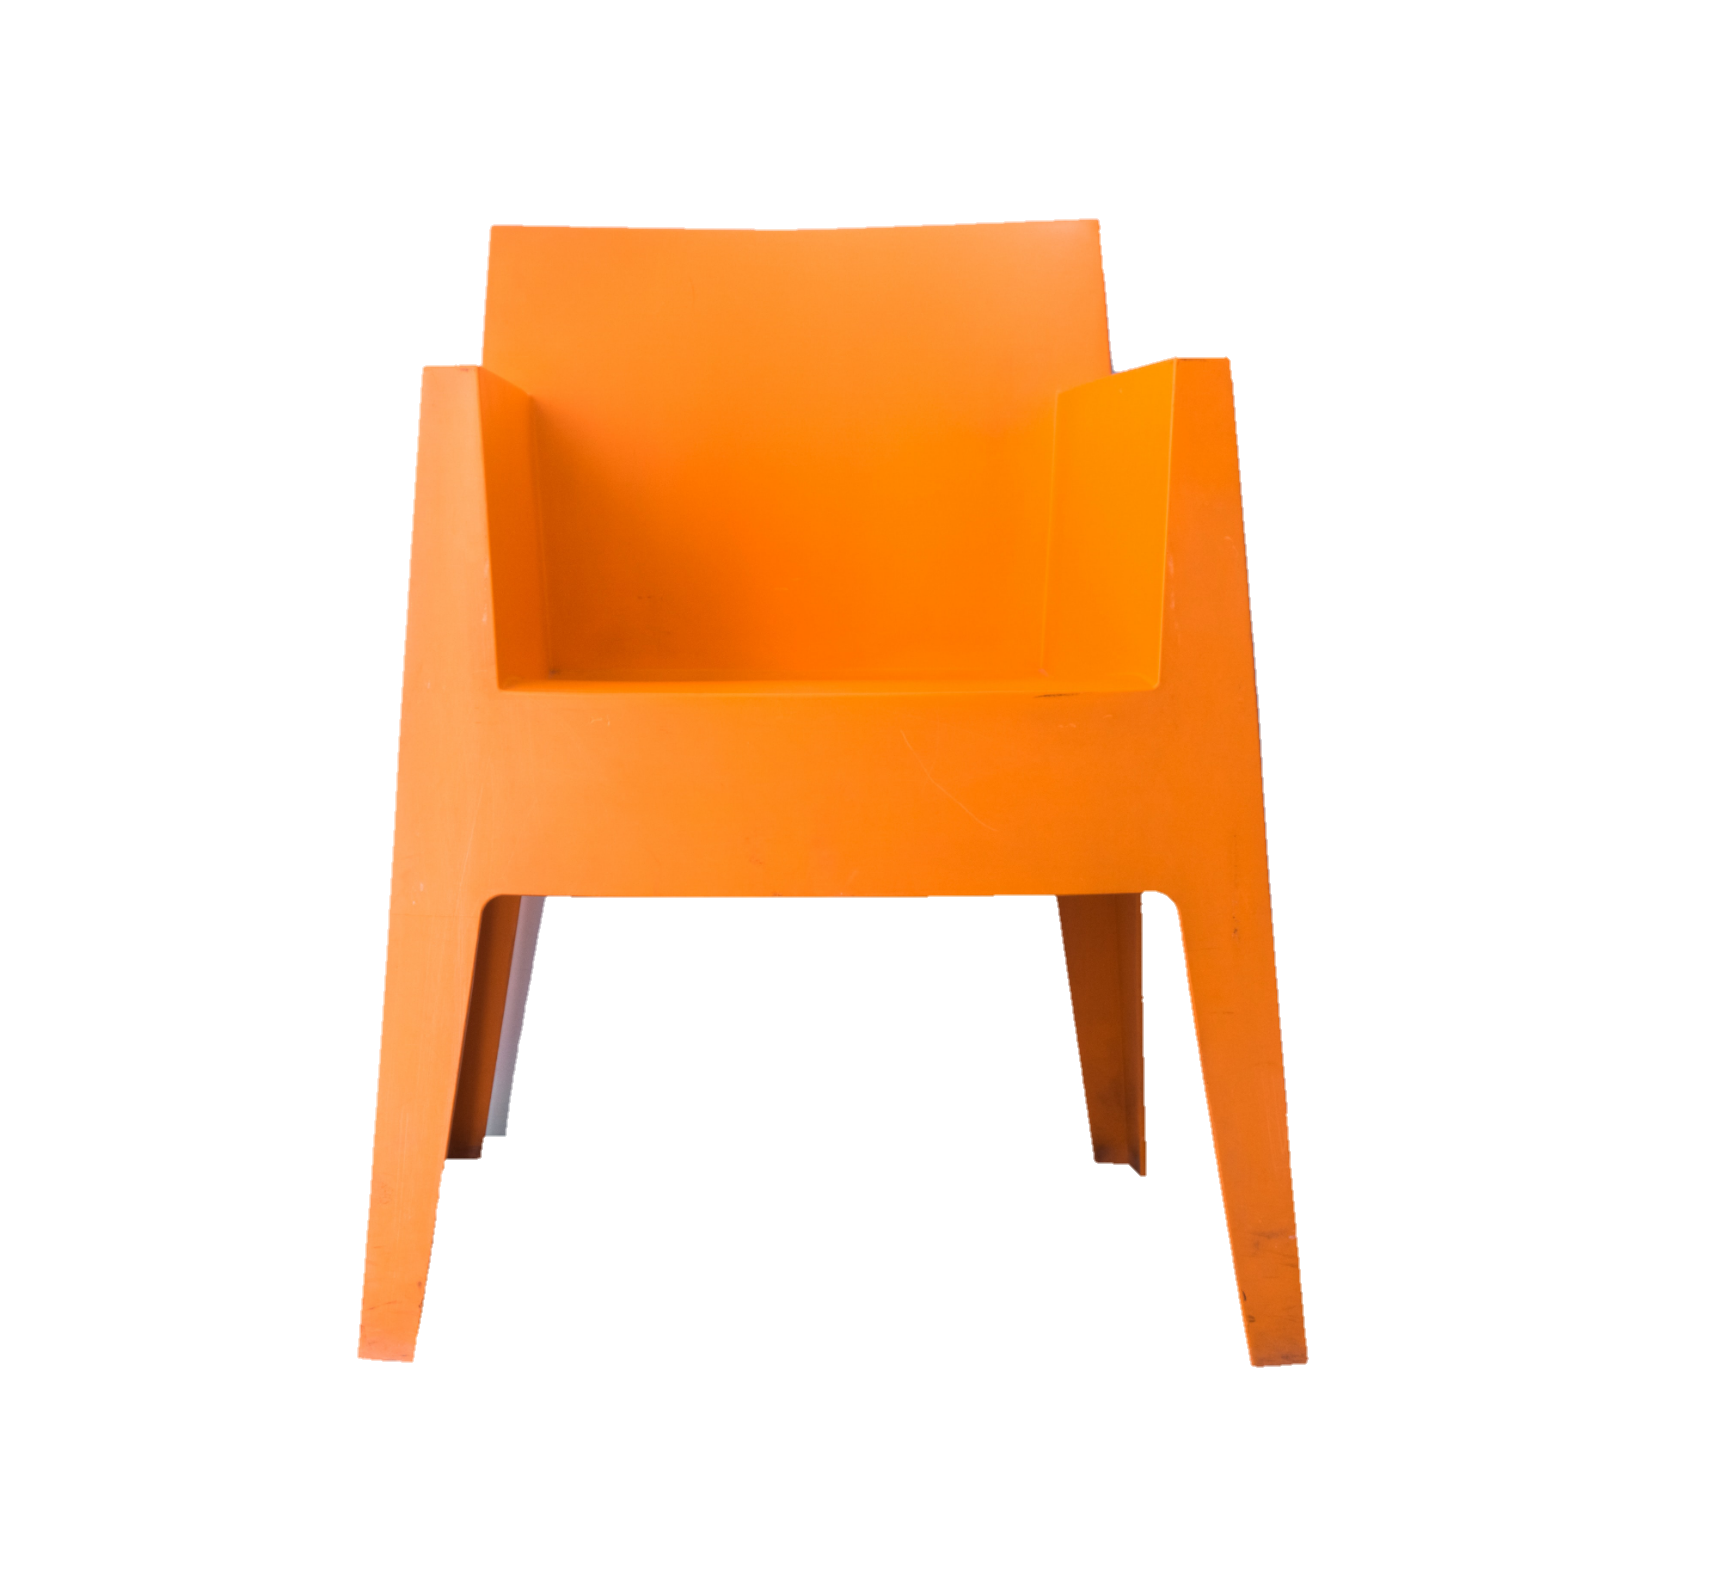 chair-png-image-pngfre-6